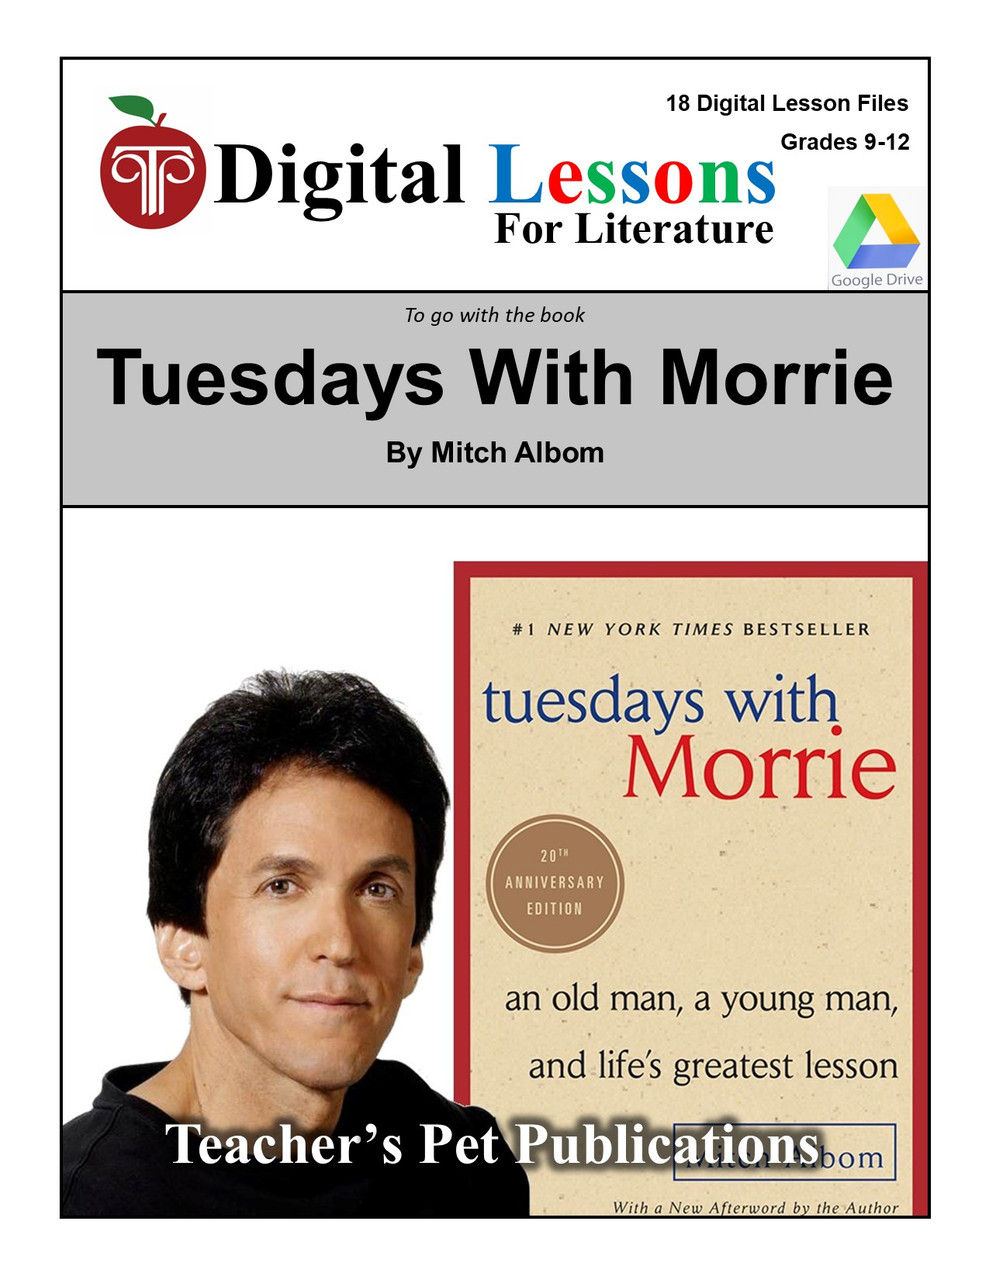 Tuesdays with Morrie: An Old Man, a Young Man, and Life's Greatest Lesson  (Paperback)